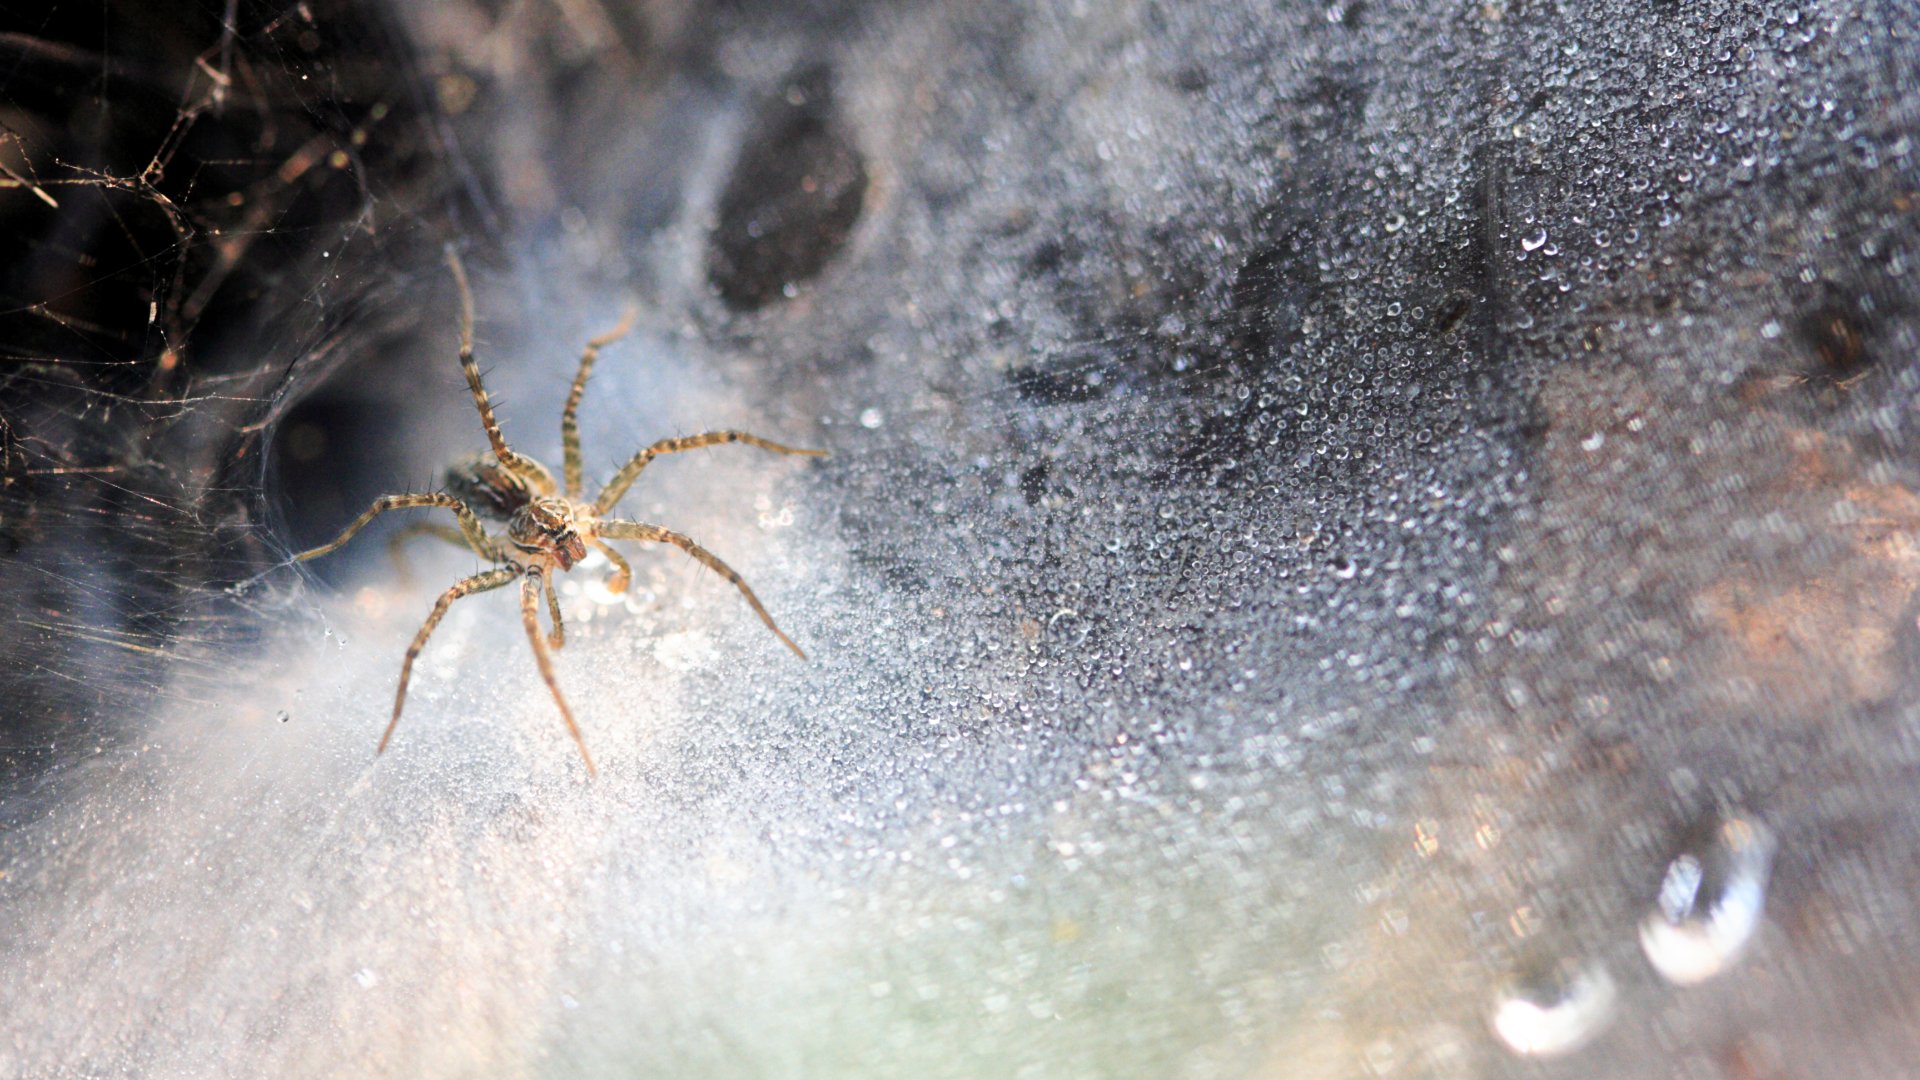 How to Prevent Spiders From Making Your Home Their Home